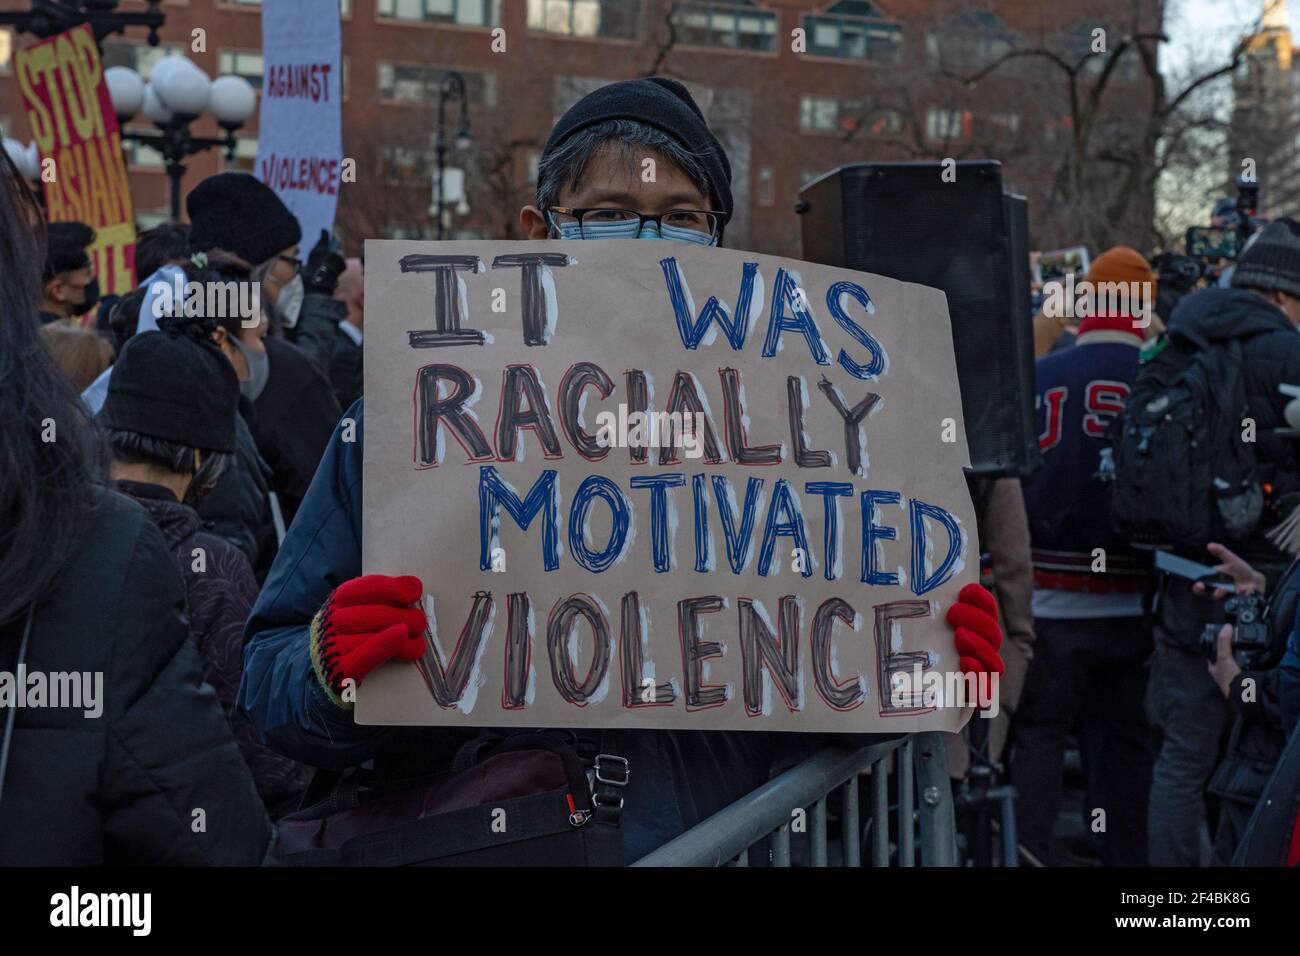 A Protestor holds a sign that reads 'it was racially motivated violence' at a peace vigil to honor victims of attacks on Asians in Union Square Park. On March 16th, eight people were killed at three Atlanta, Georgia area spas, six of whom were Asian women, in an attack that sent terror through the Asian community. Stock Photo